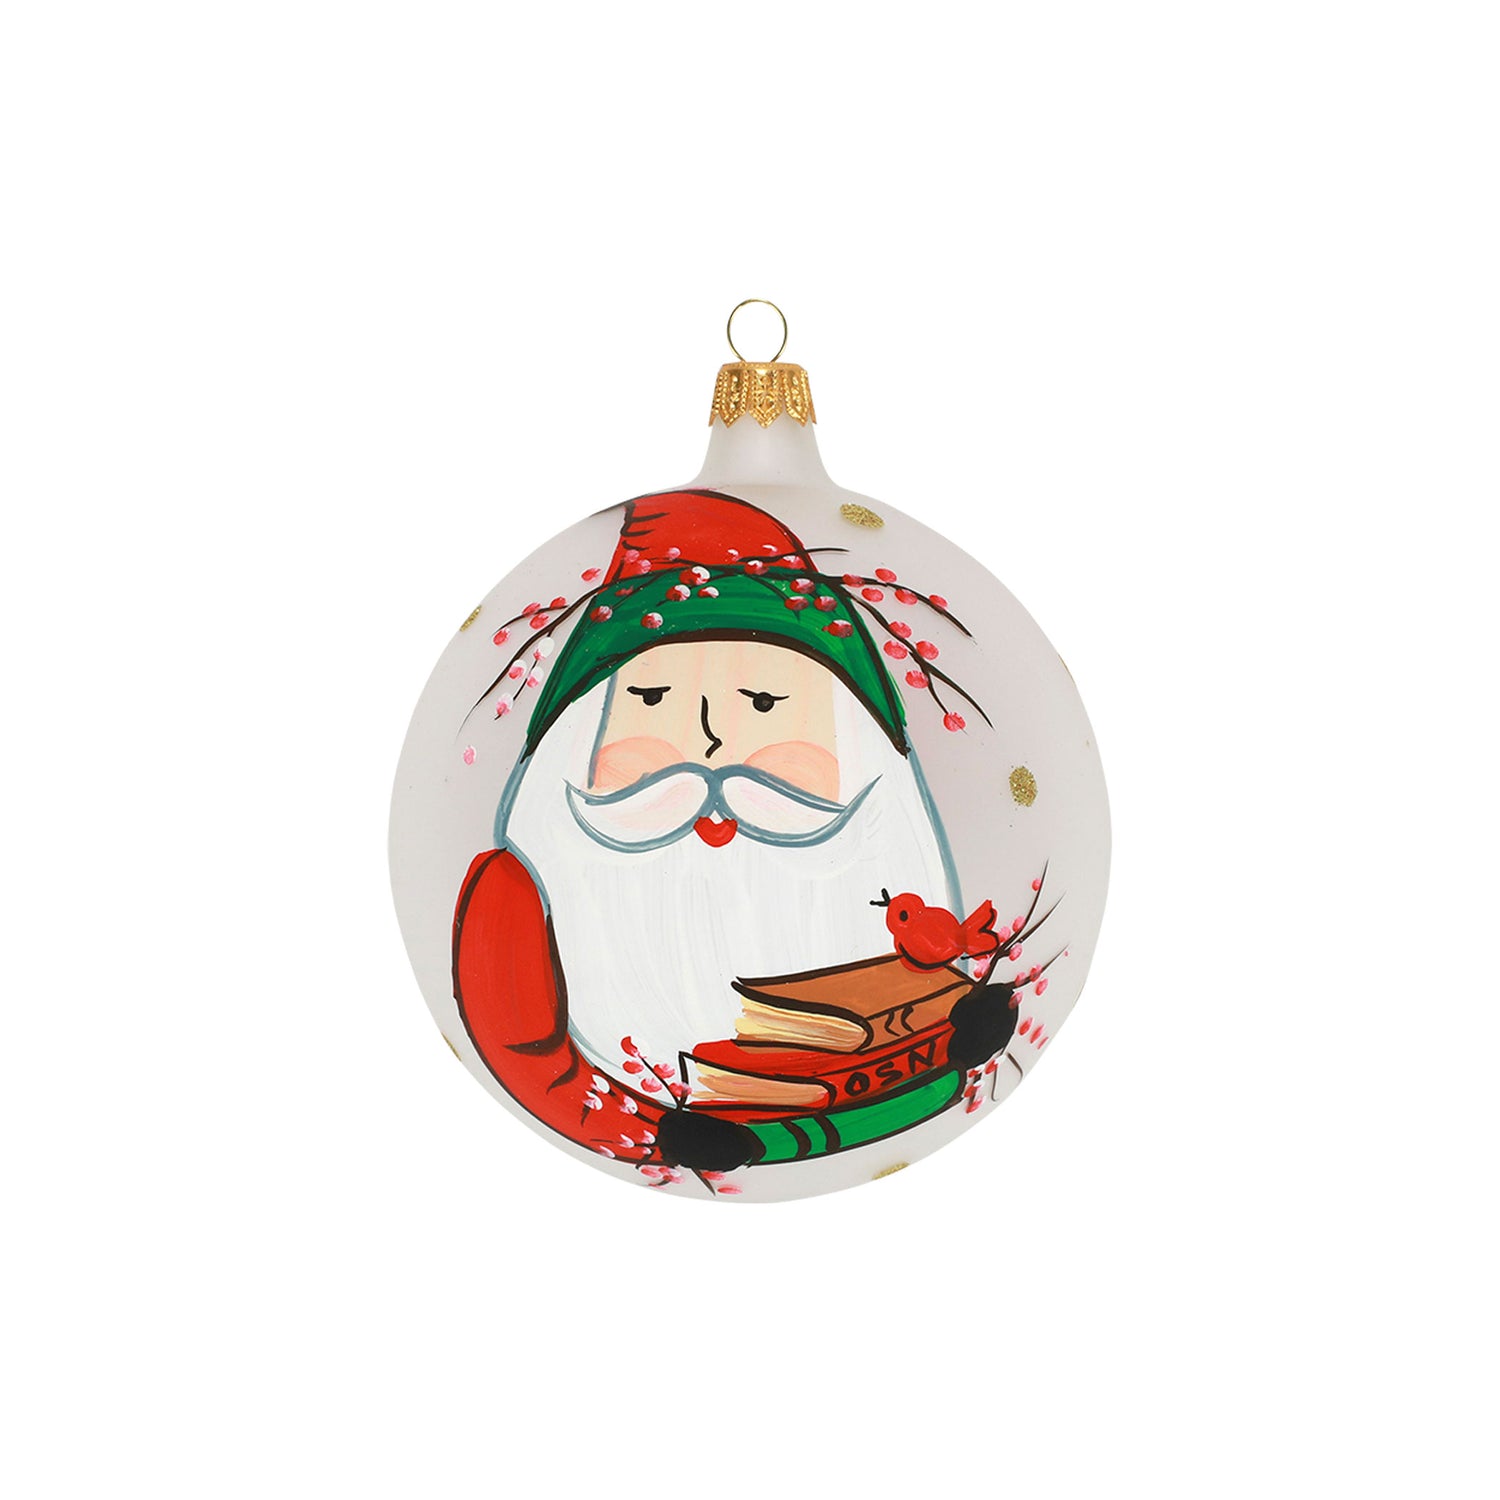 Vietri Old St. Nick 2021 Limited Edition Ornament